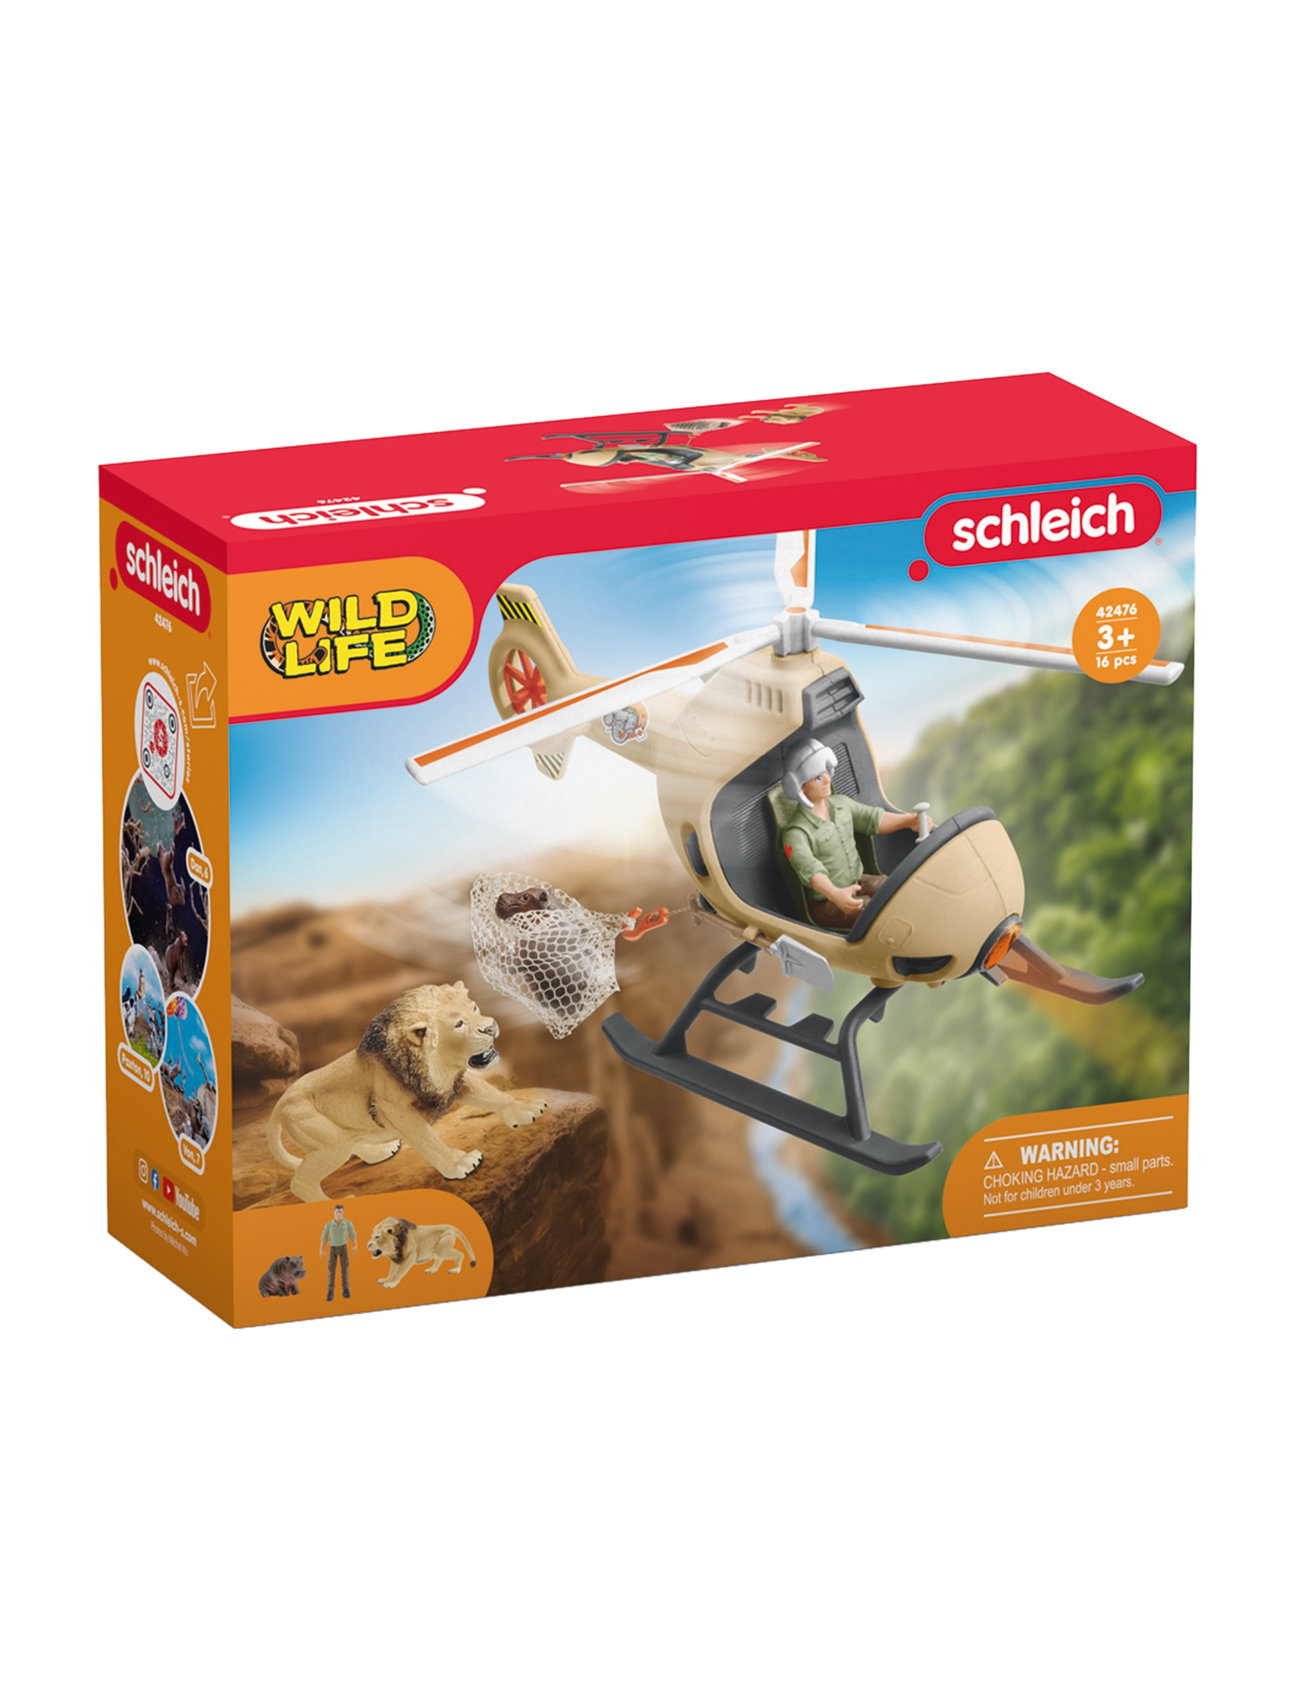 Schleich Animal Rescue Helicopter Toys Playsets & Action Figures Play Sets Multi/patterned Schleich